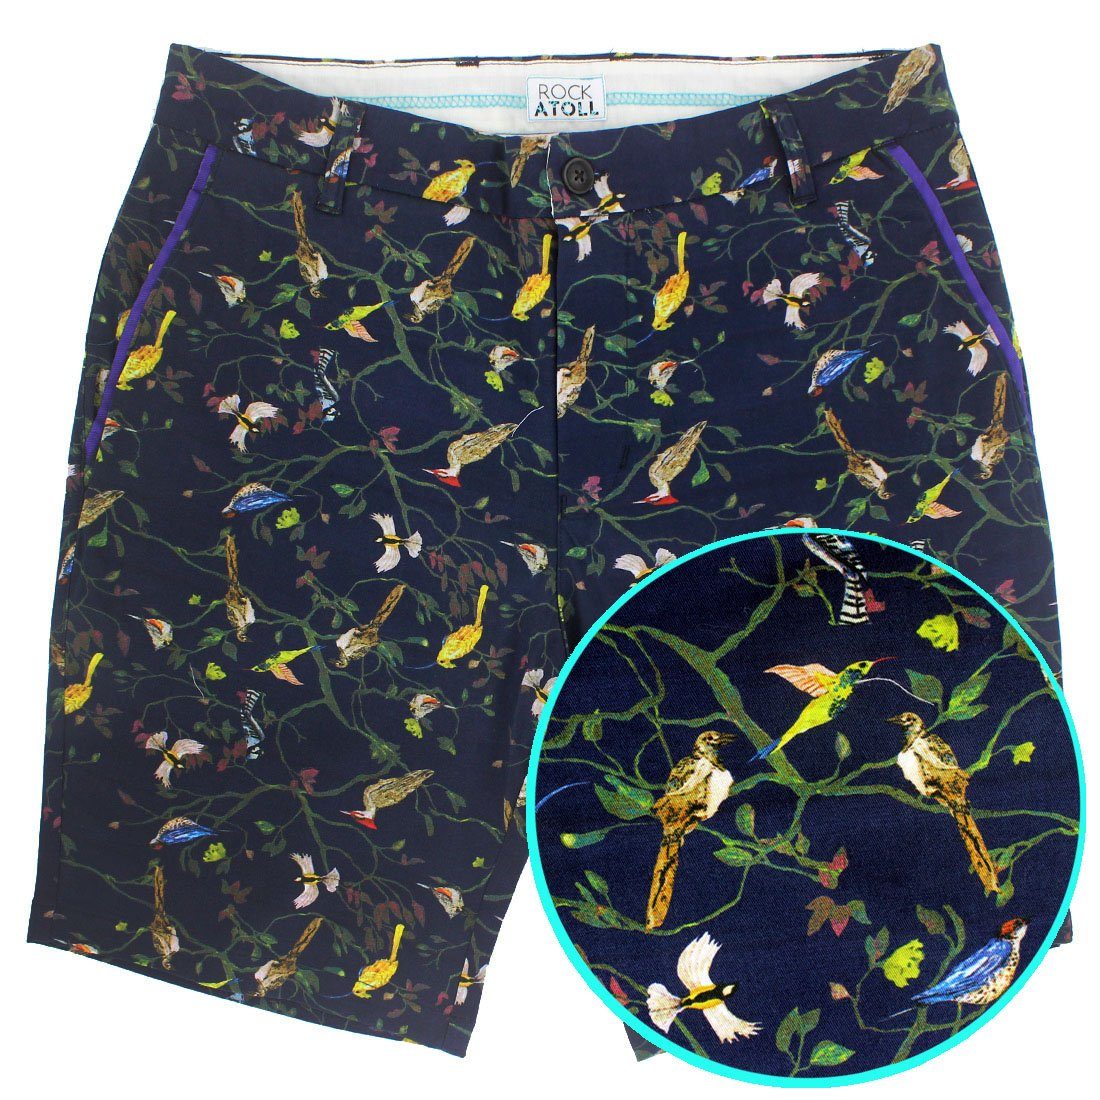 Colorful Birds All Over Print Men's Shorts Preppy Fit Chino